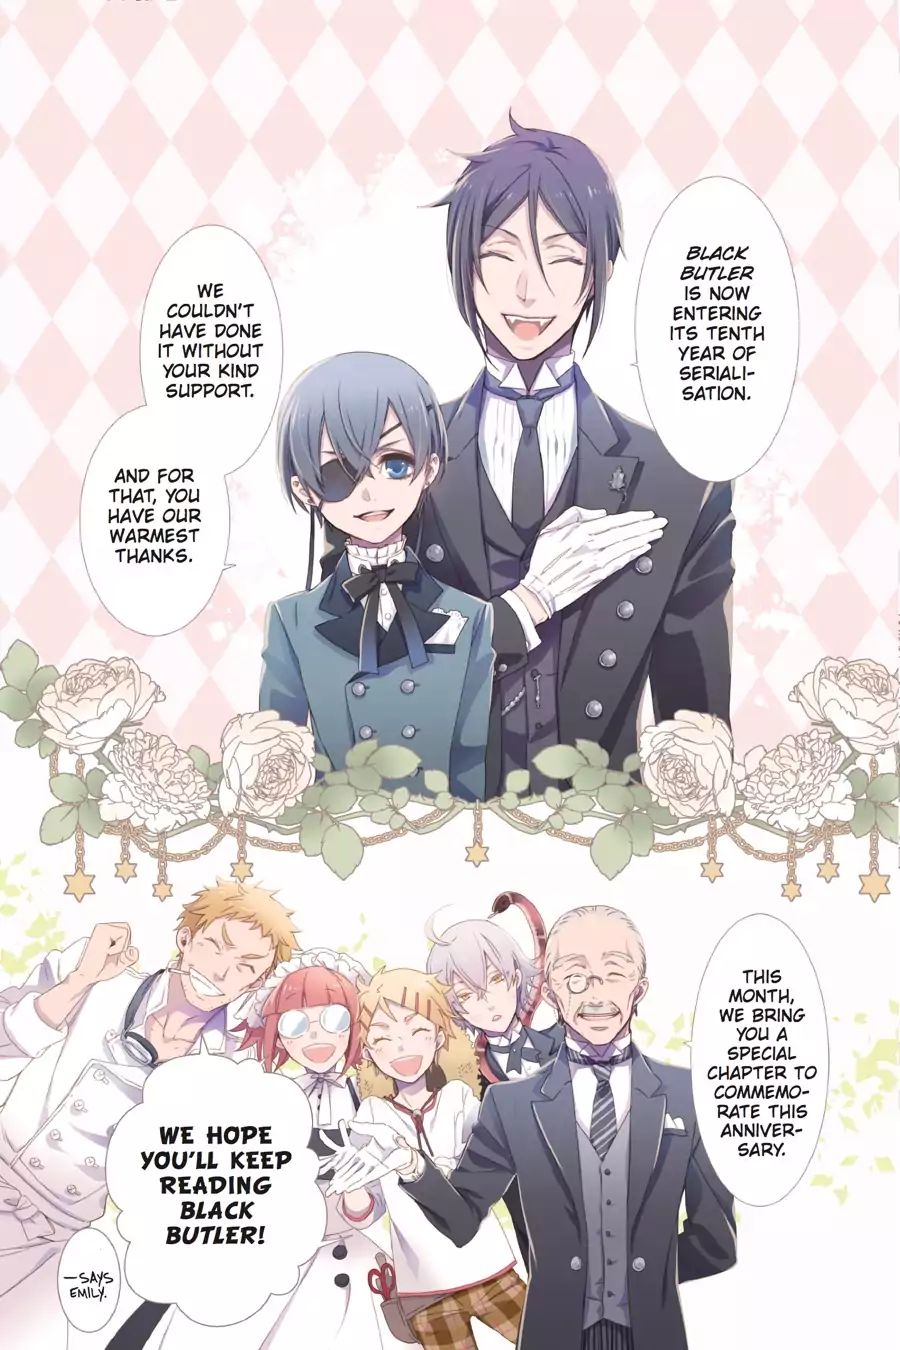 Kuroshitsuji Vol.24  Bonus Chapter: On A Special Day: The Butler, Lyrical - Picture 1